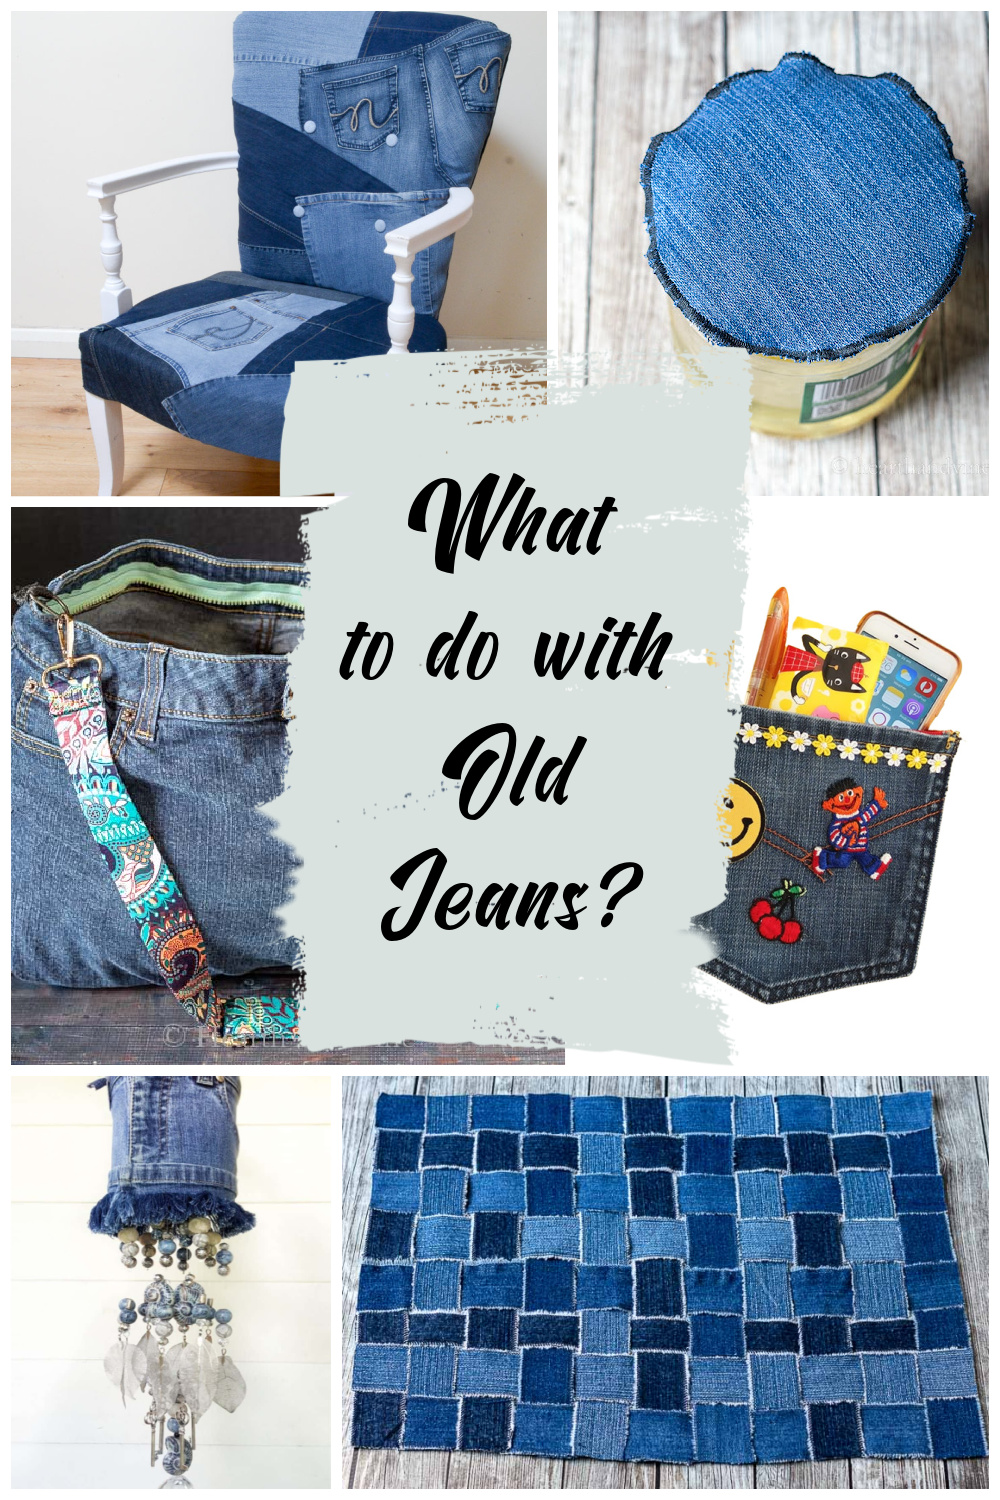 Collage of upcycled jean projects including a placemat, wind chimes, purse, chair and pouch.